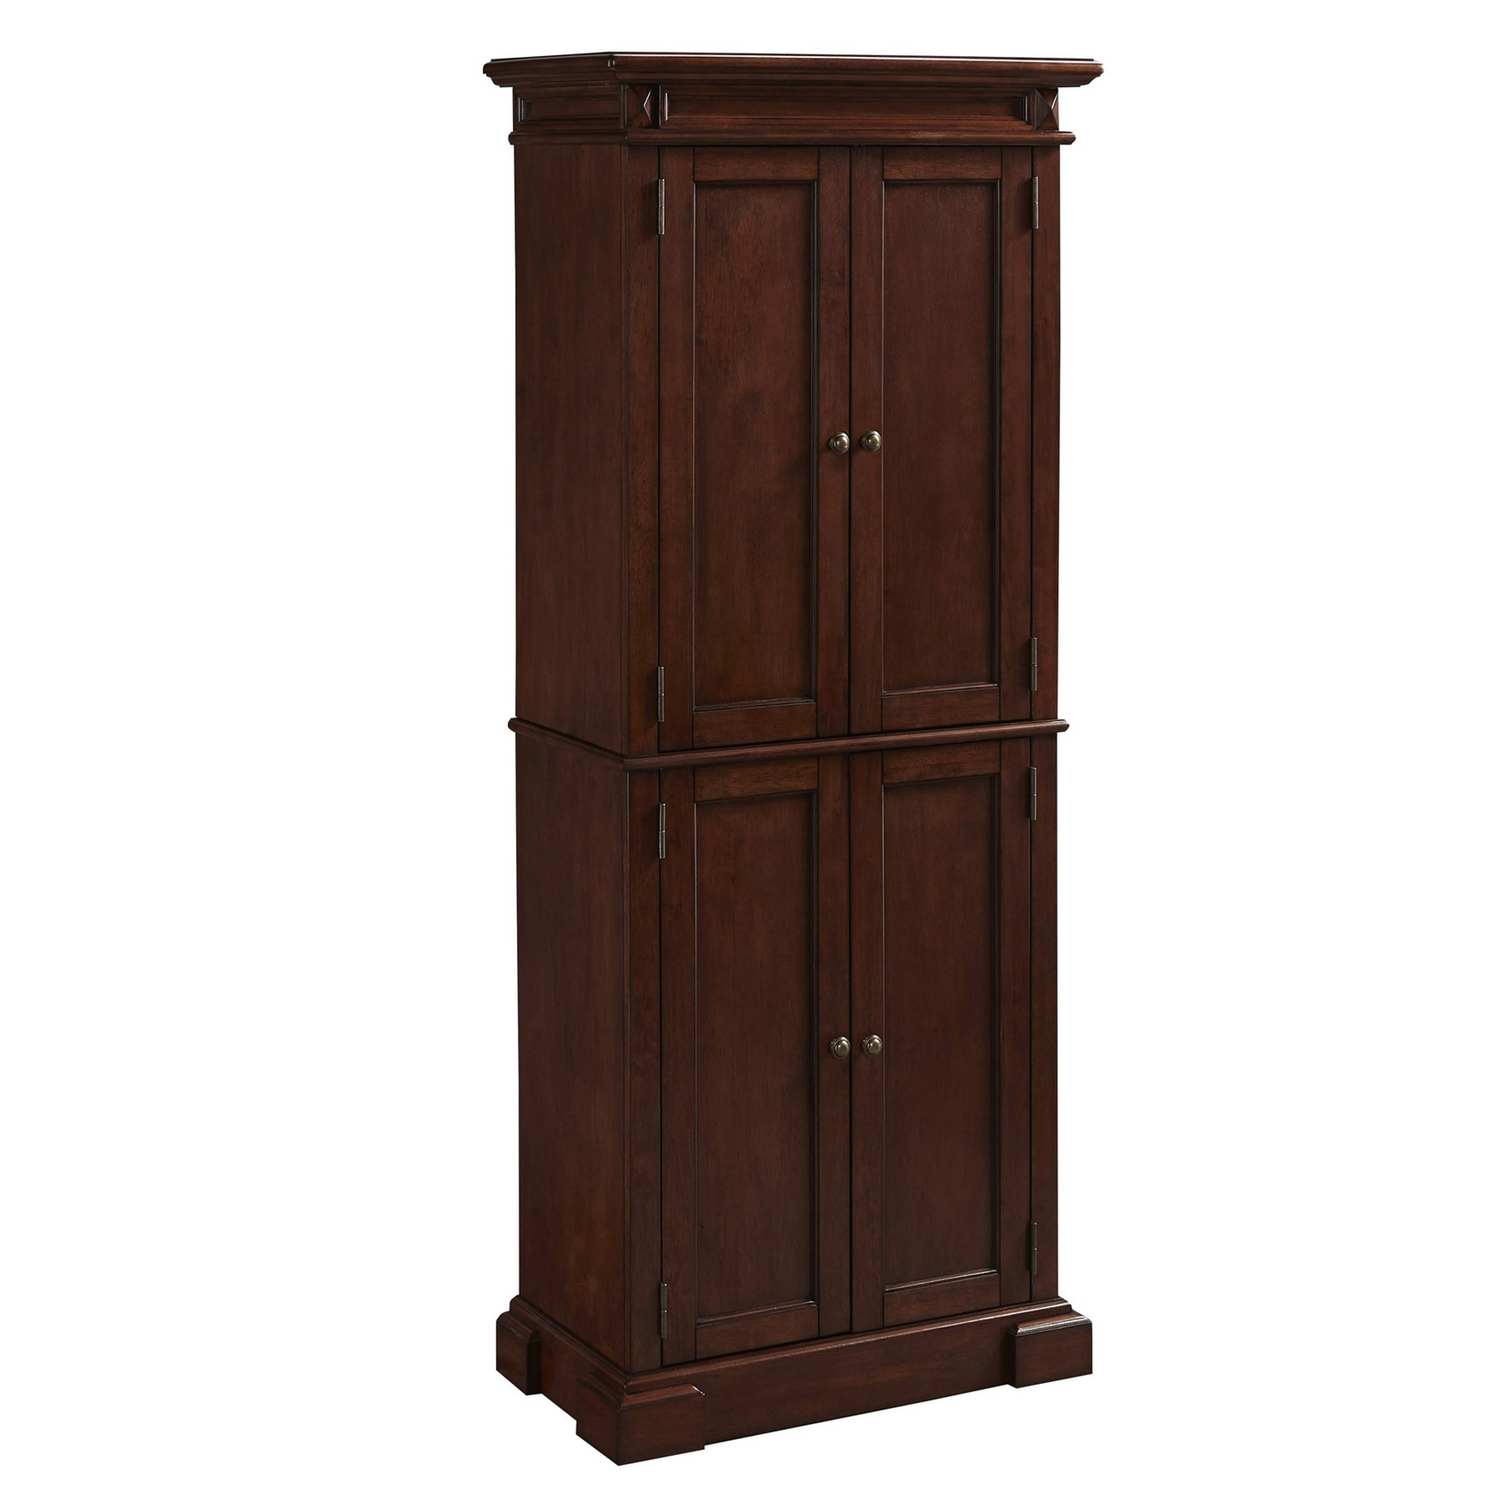 Bakers Racks and Pantry Cabinets Category